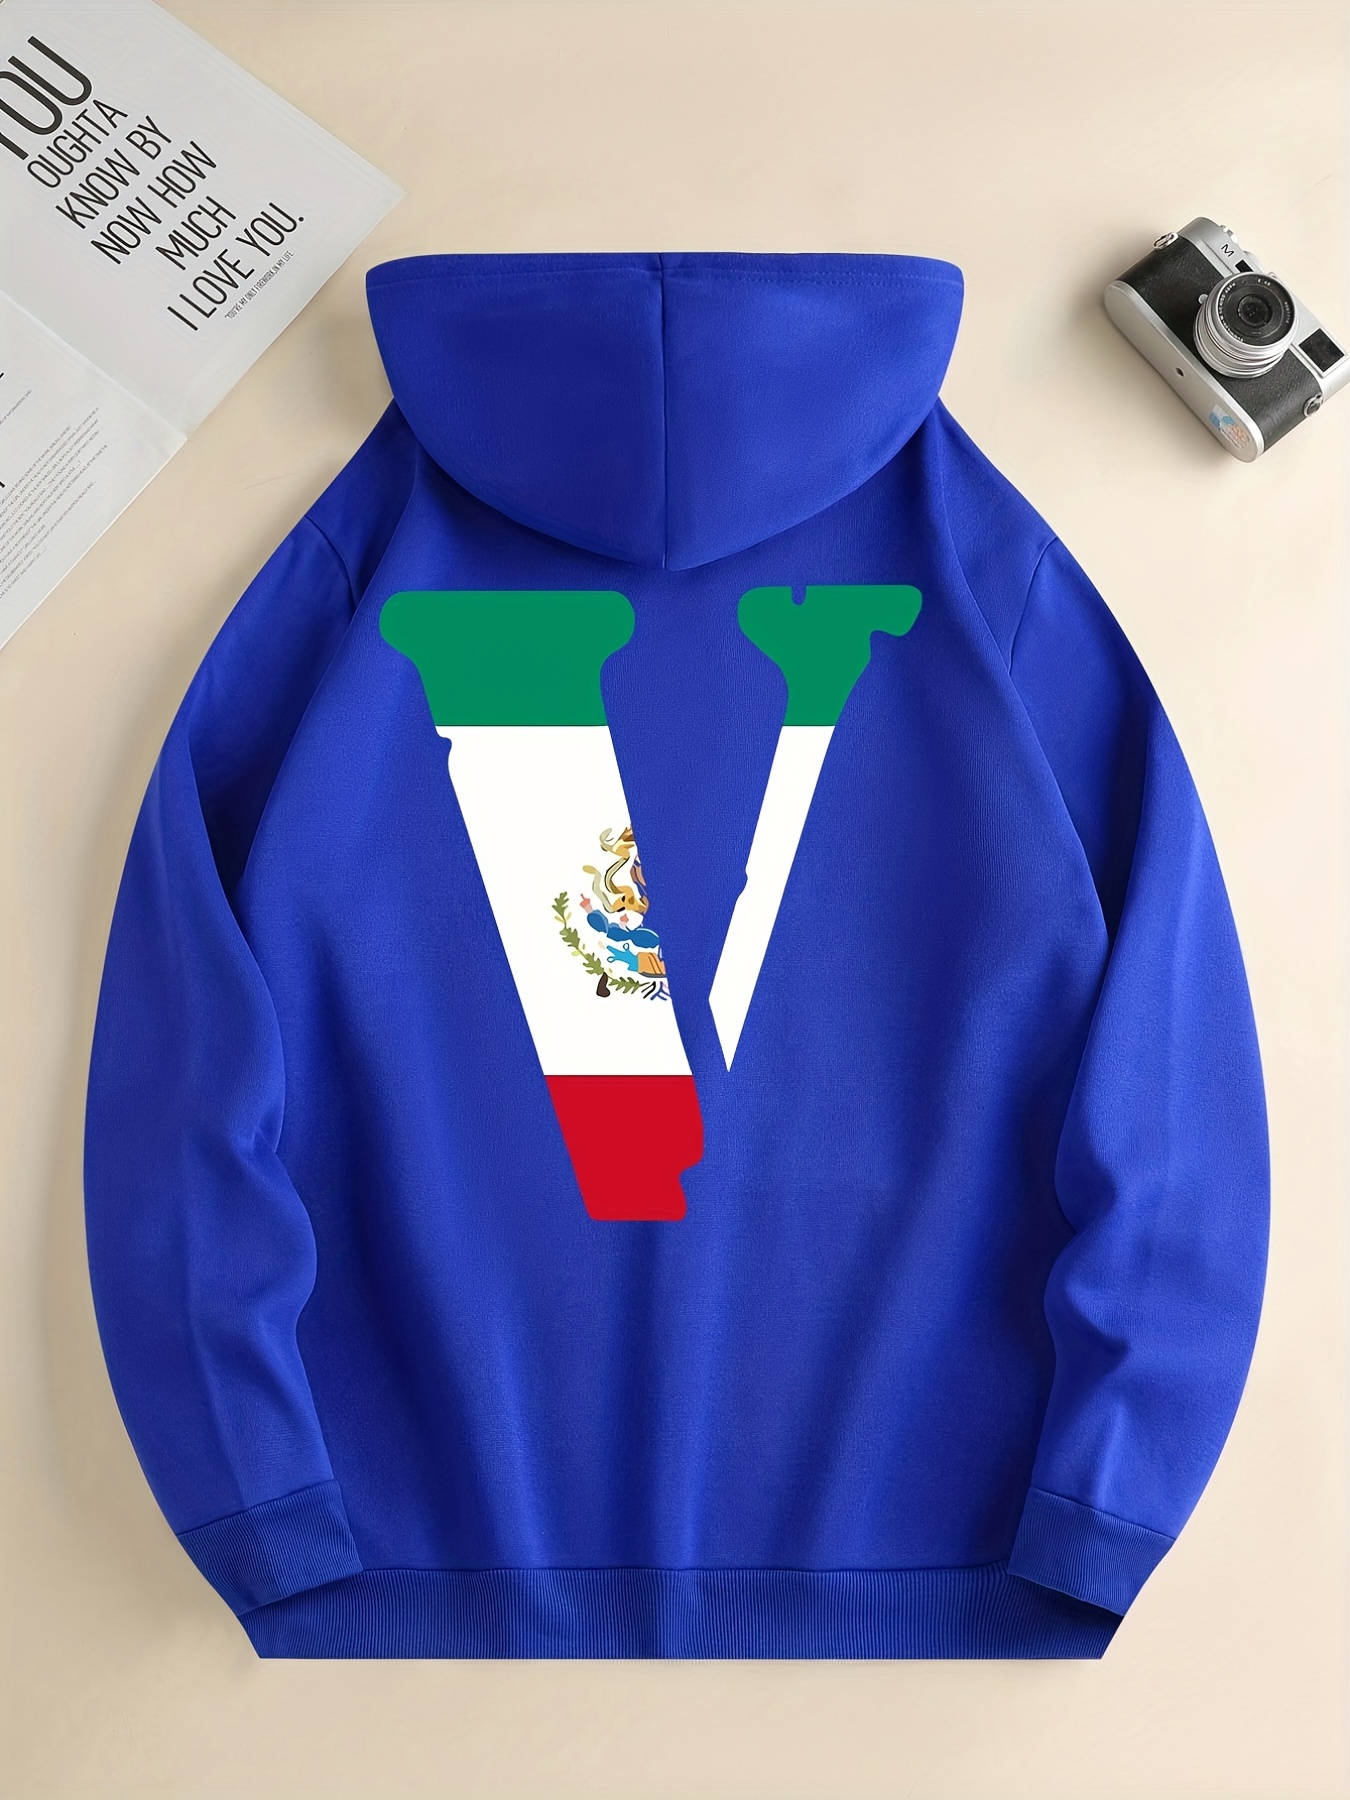 Letter V Mexico Flag Hoodie, Hoodies For Men, Men's Casual Pullover Hooded With Kangaroo Pocket For Spring As Gifts -